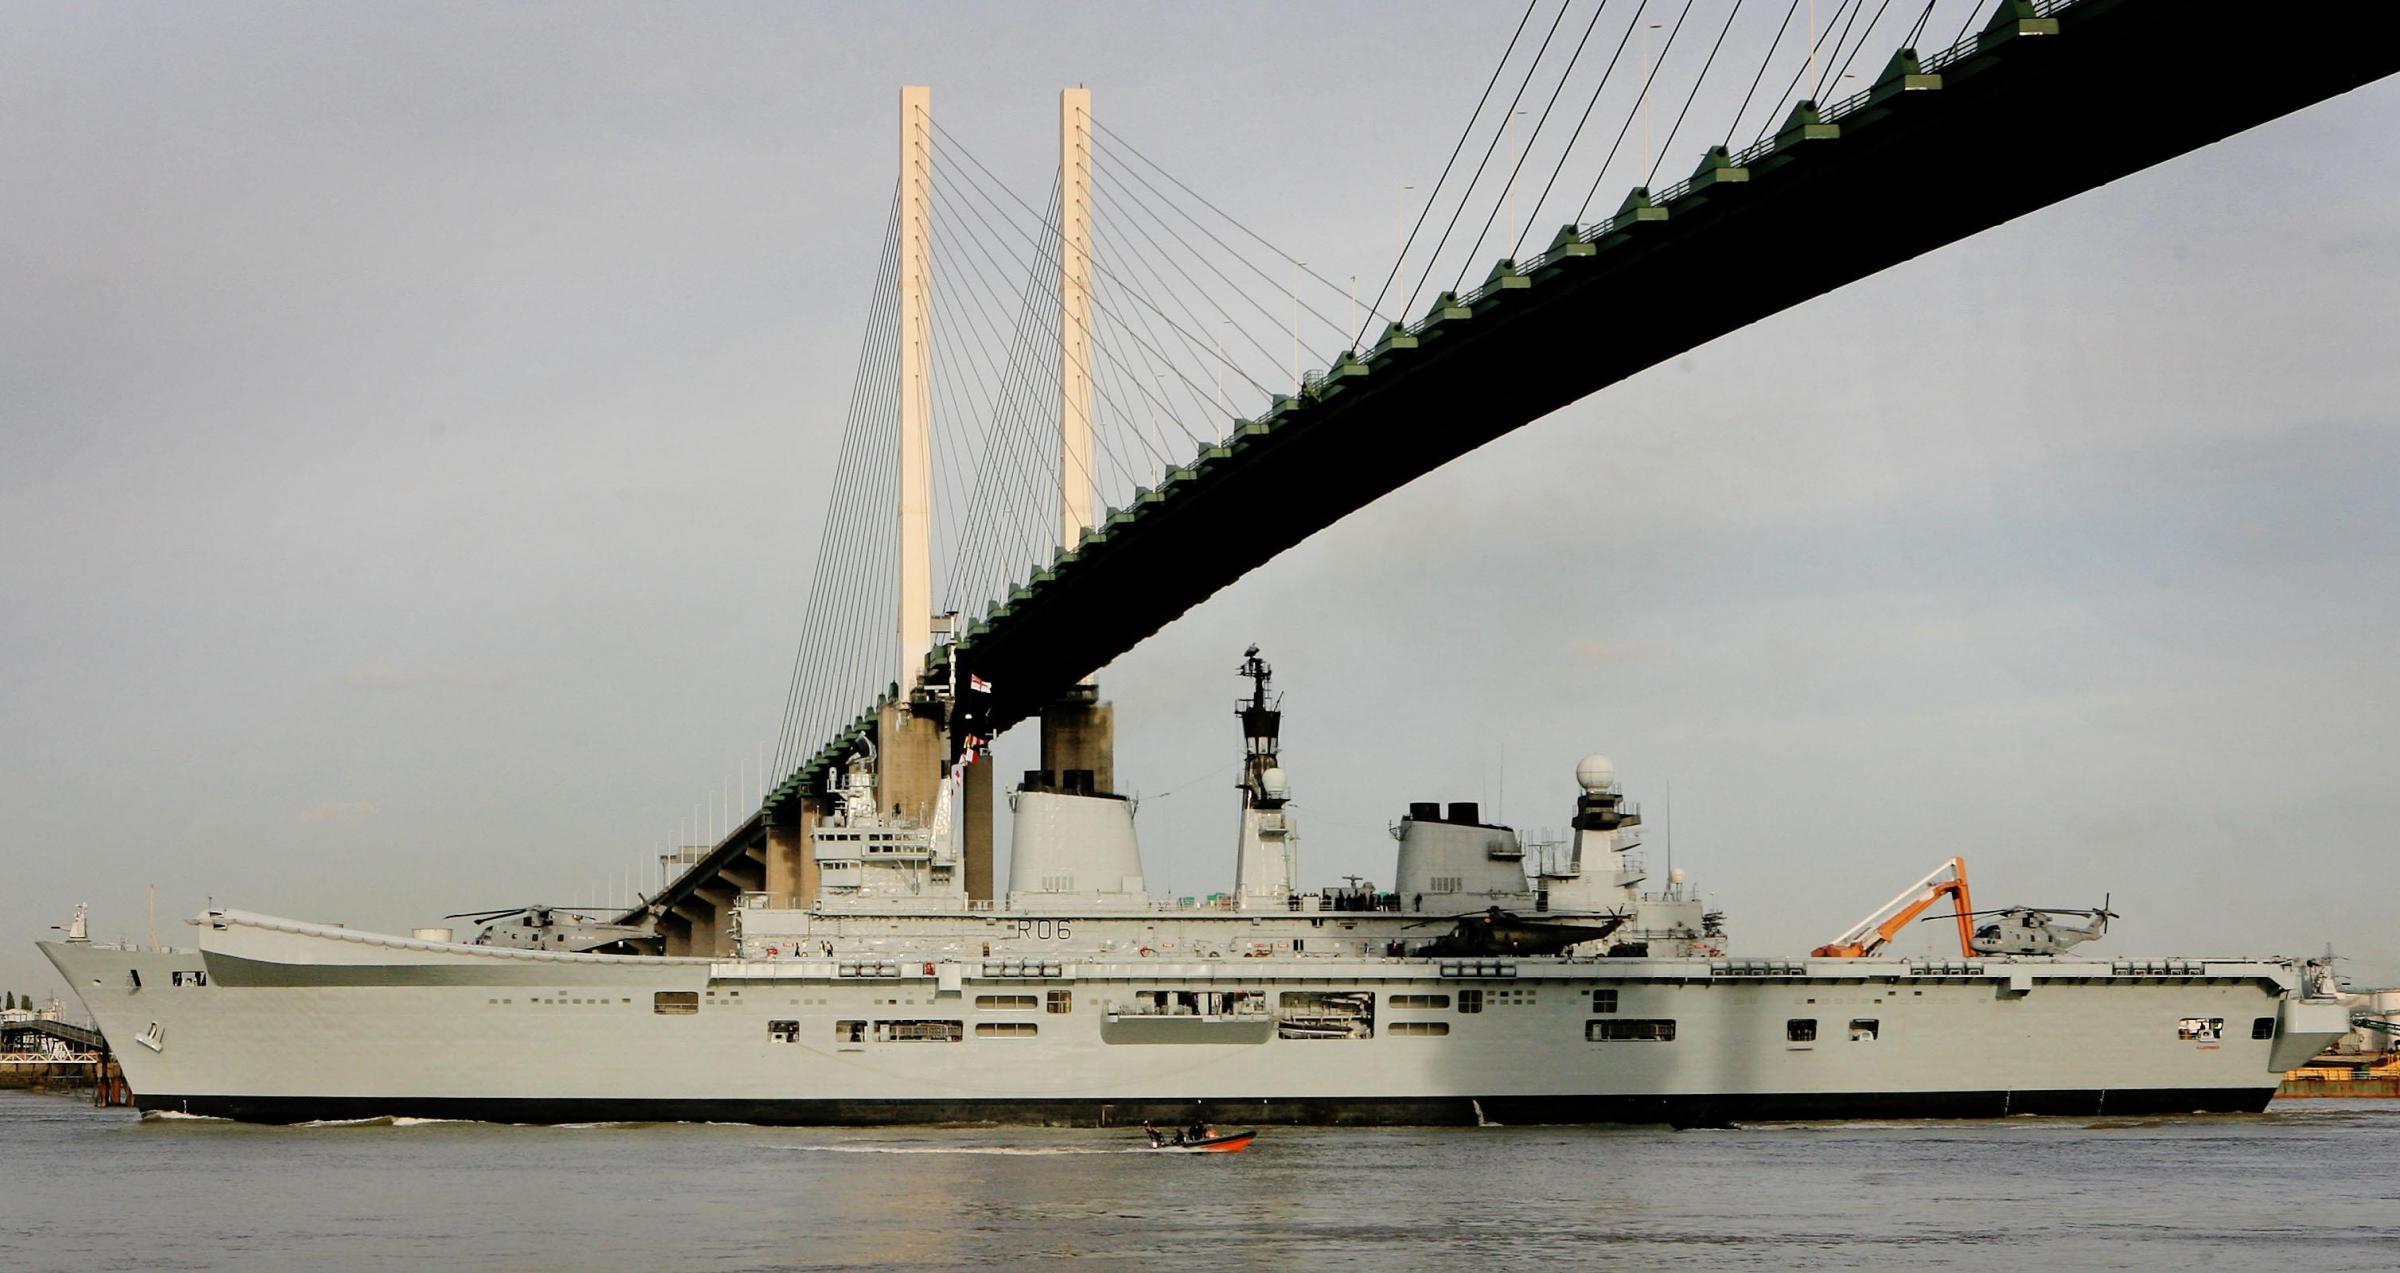 Sailing below - Royal Navy flagship HMS Illustrious goes under the QEII ahead of taking part in the 2006 Remembrance Day commemorations